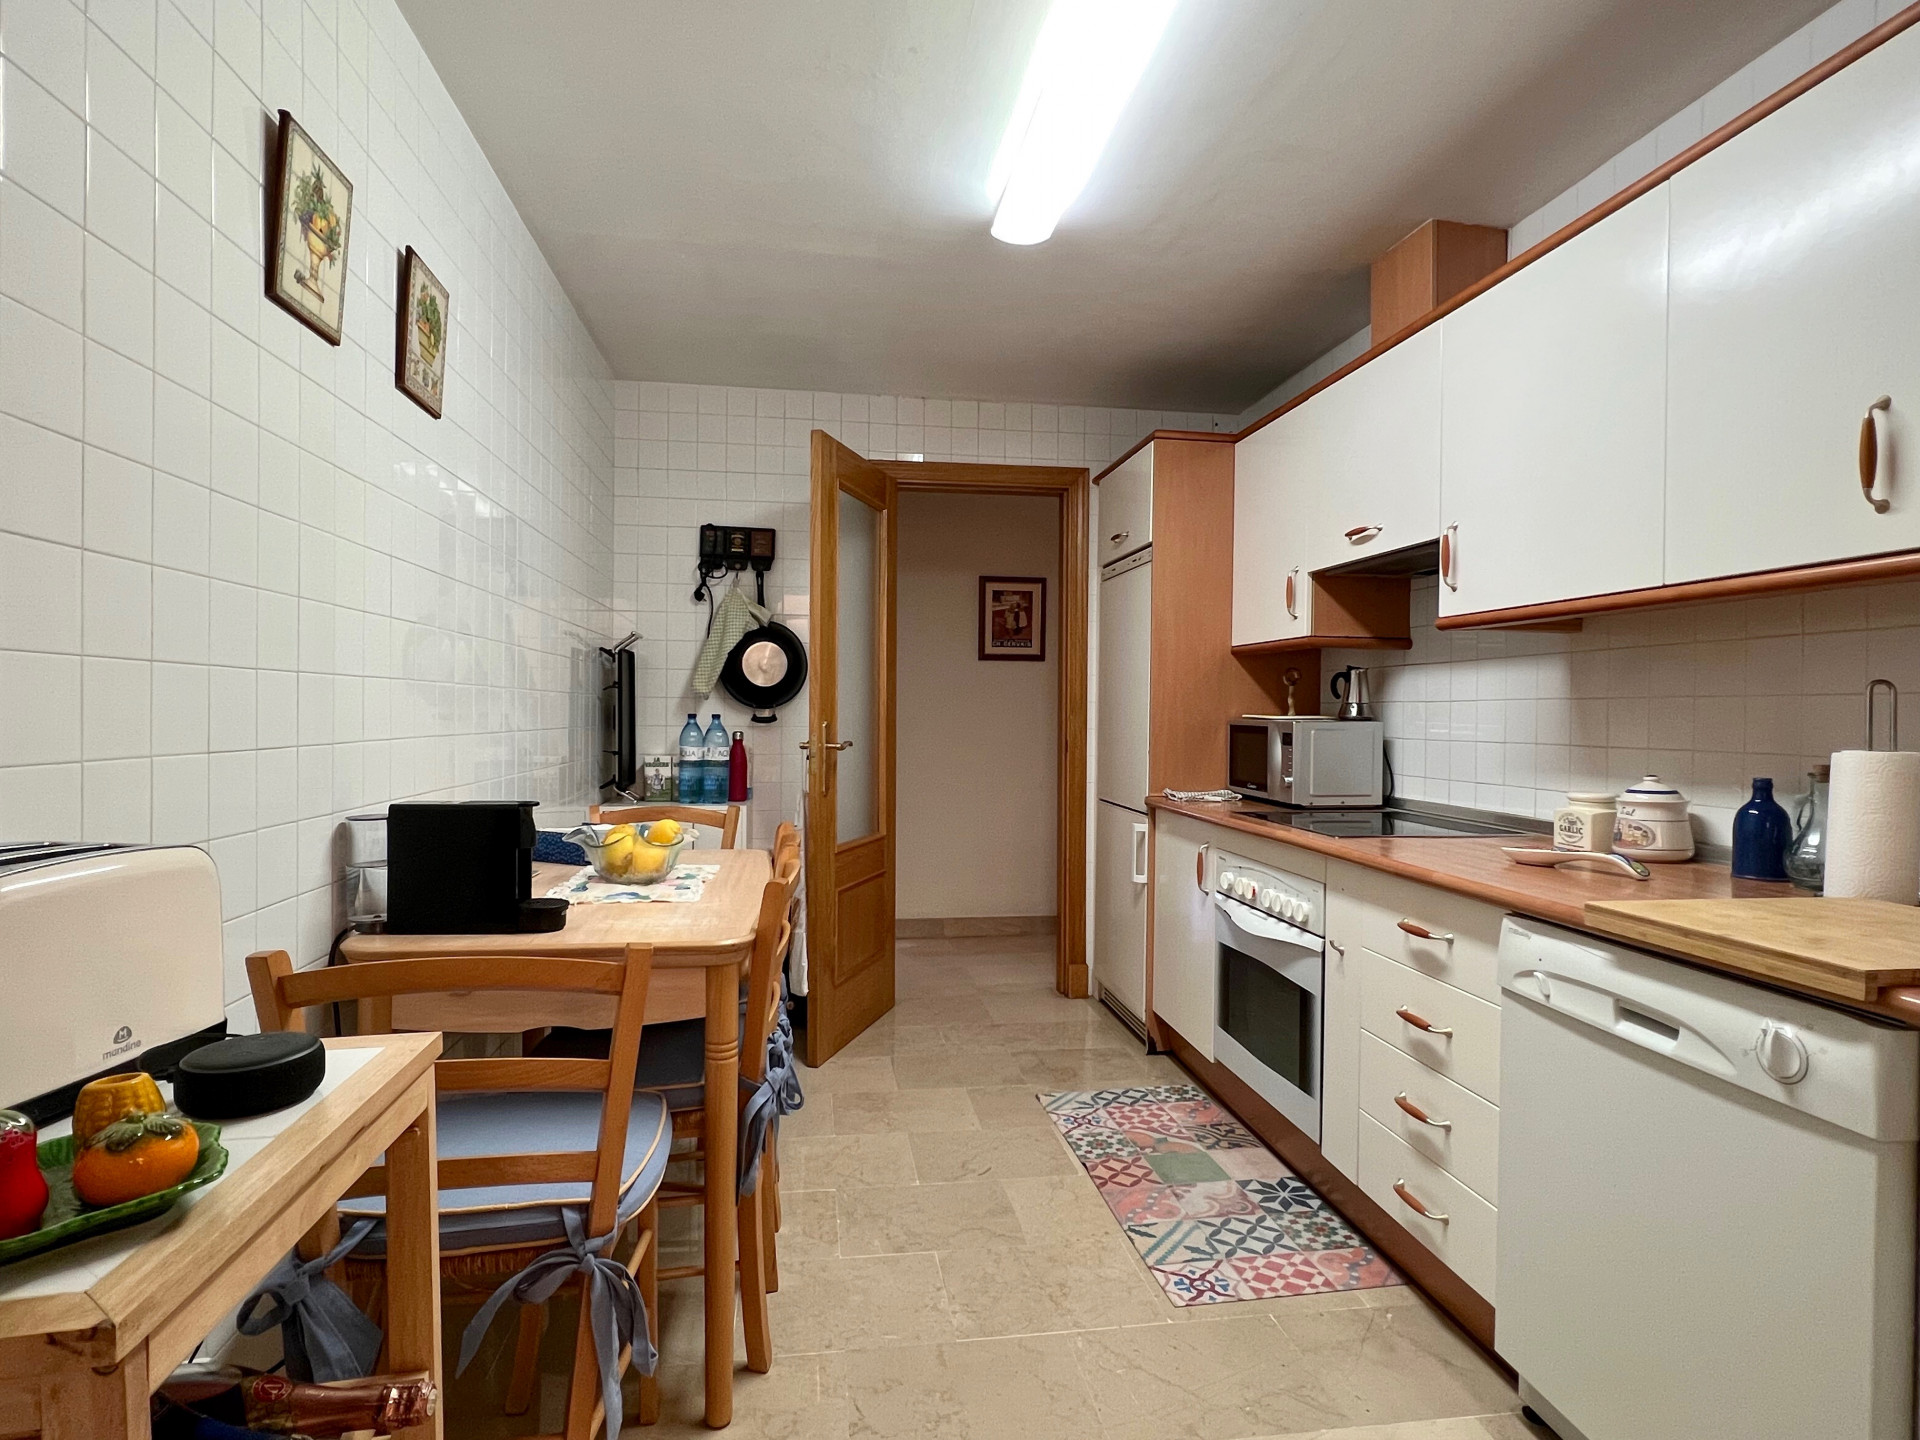 Great apartment in the heart of San Pedro Alcántara with all kinds of amenities around and a just few steps n away from the boulevard